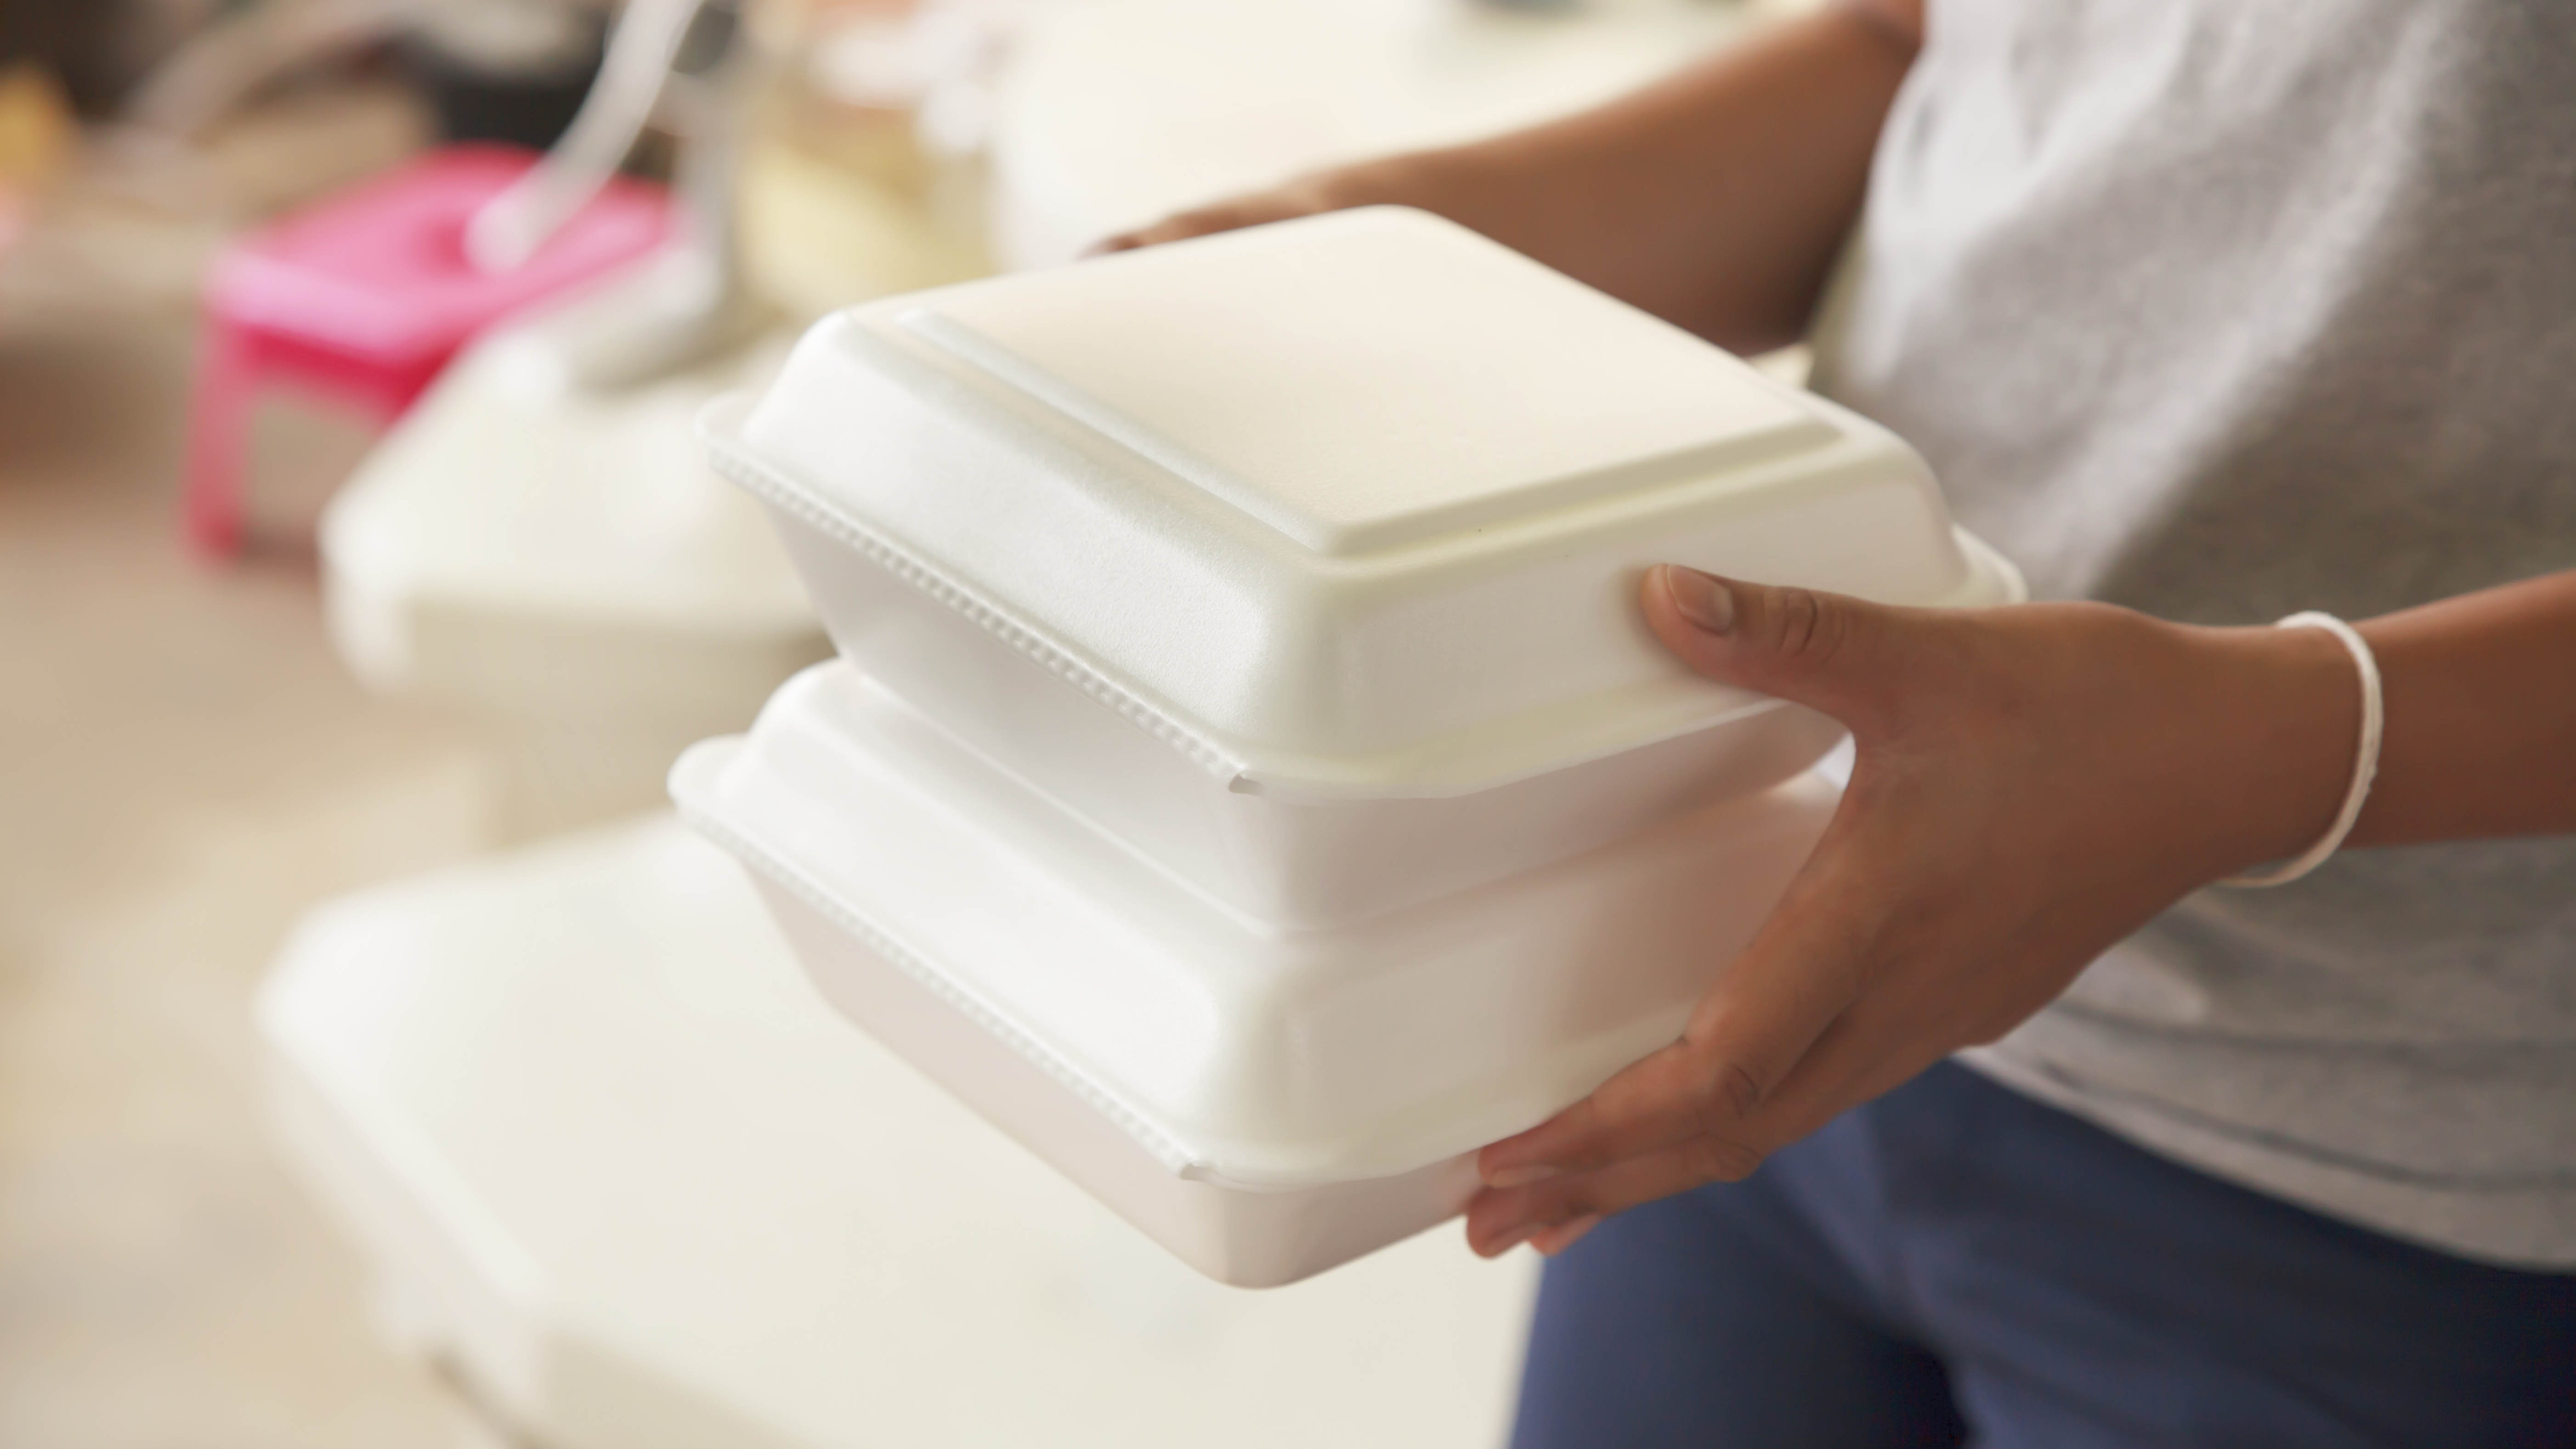 Woman holding styrofoam containers